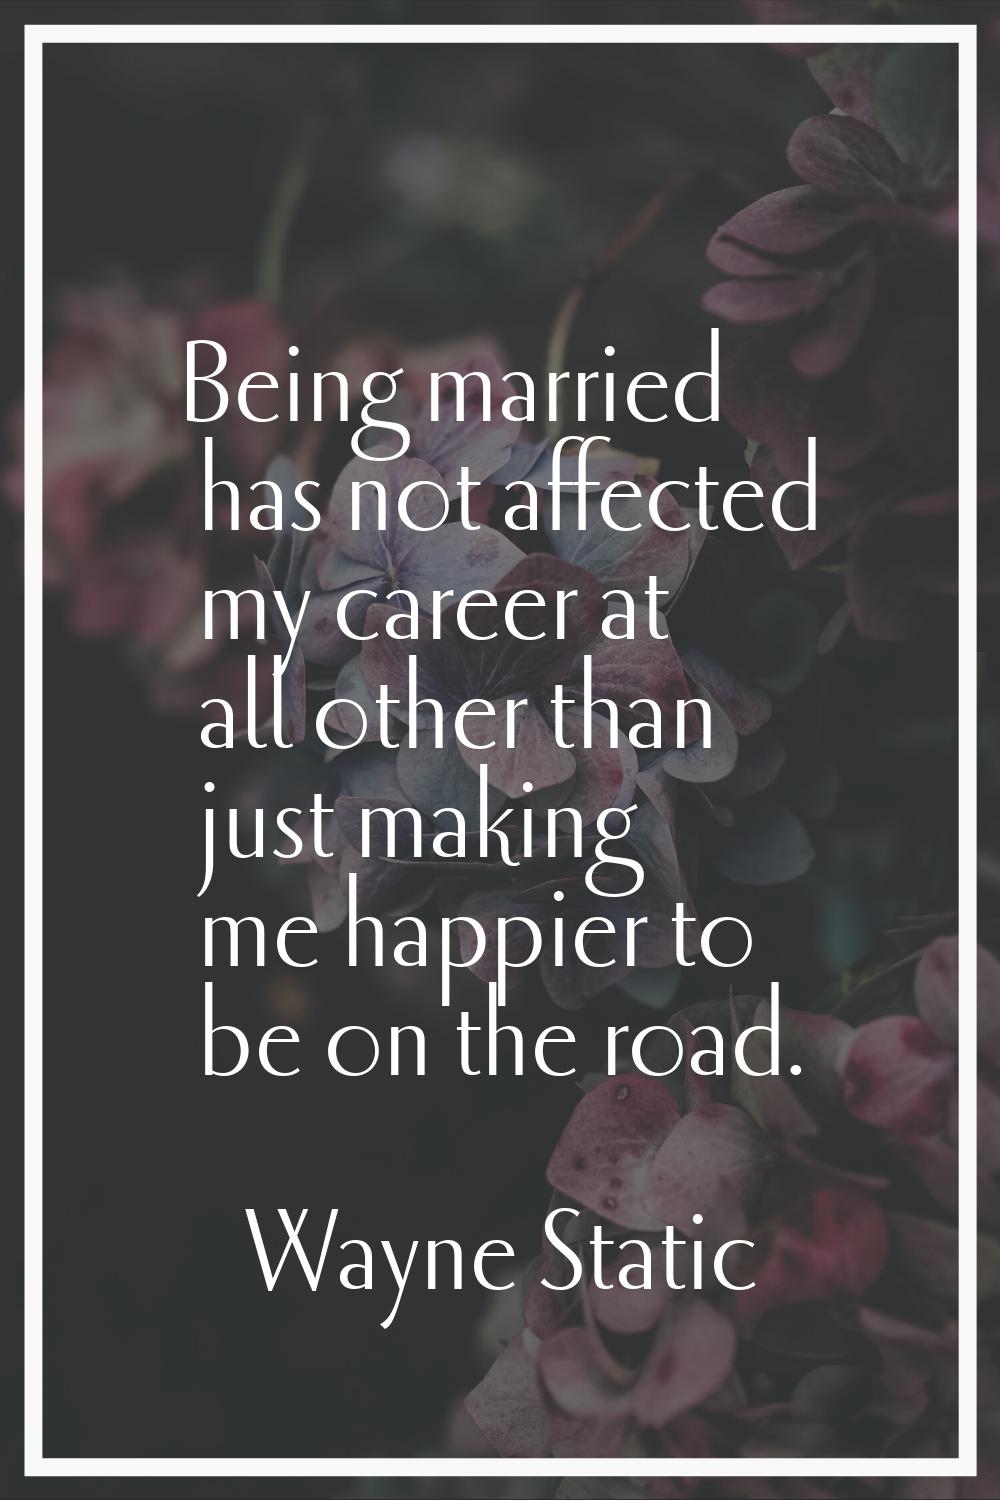 Being married has not affected my career at all other than just making me happier to be on the road